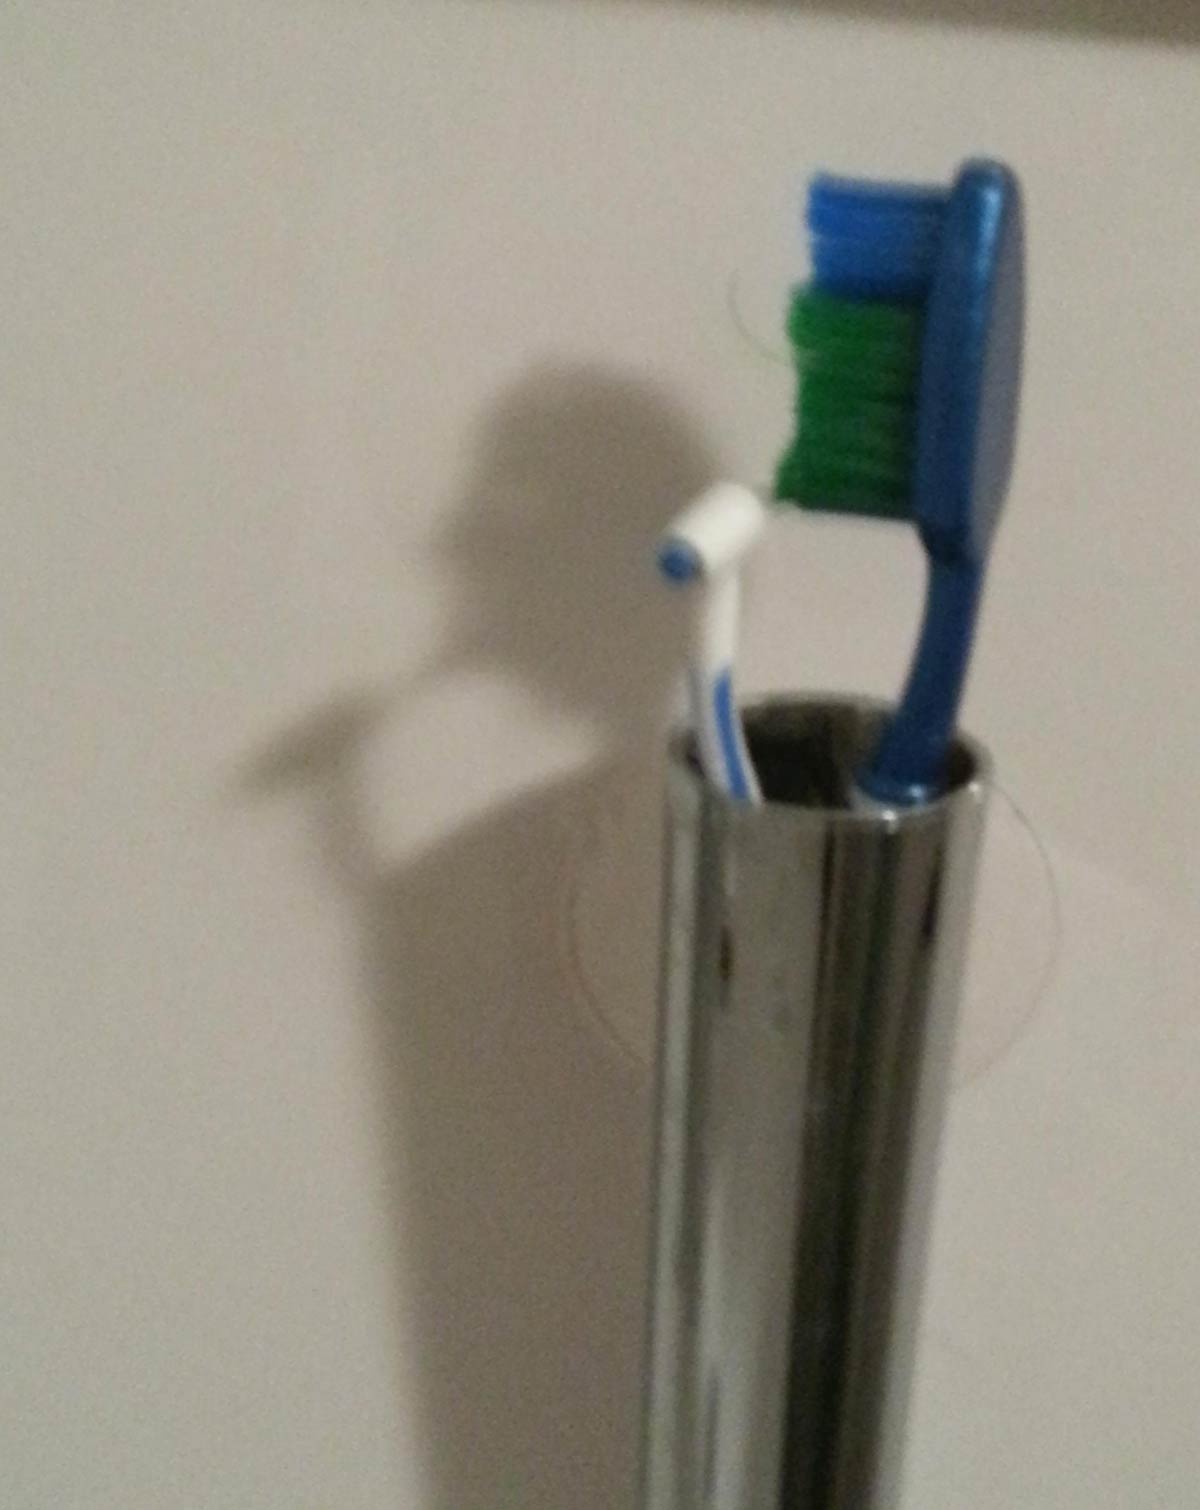 So apparently my toothbrush's shadow pays attention to its oral hygiene as well